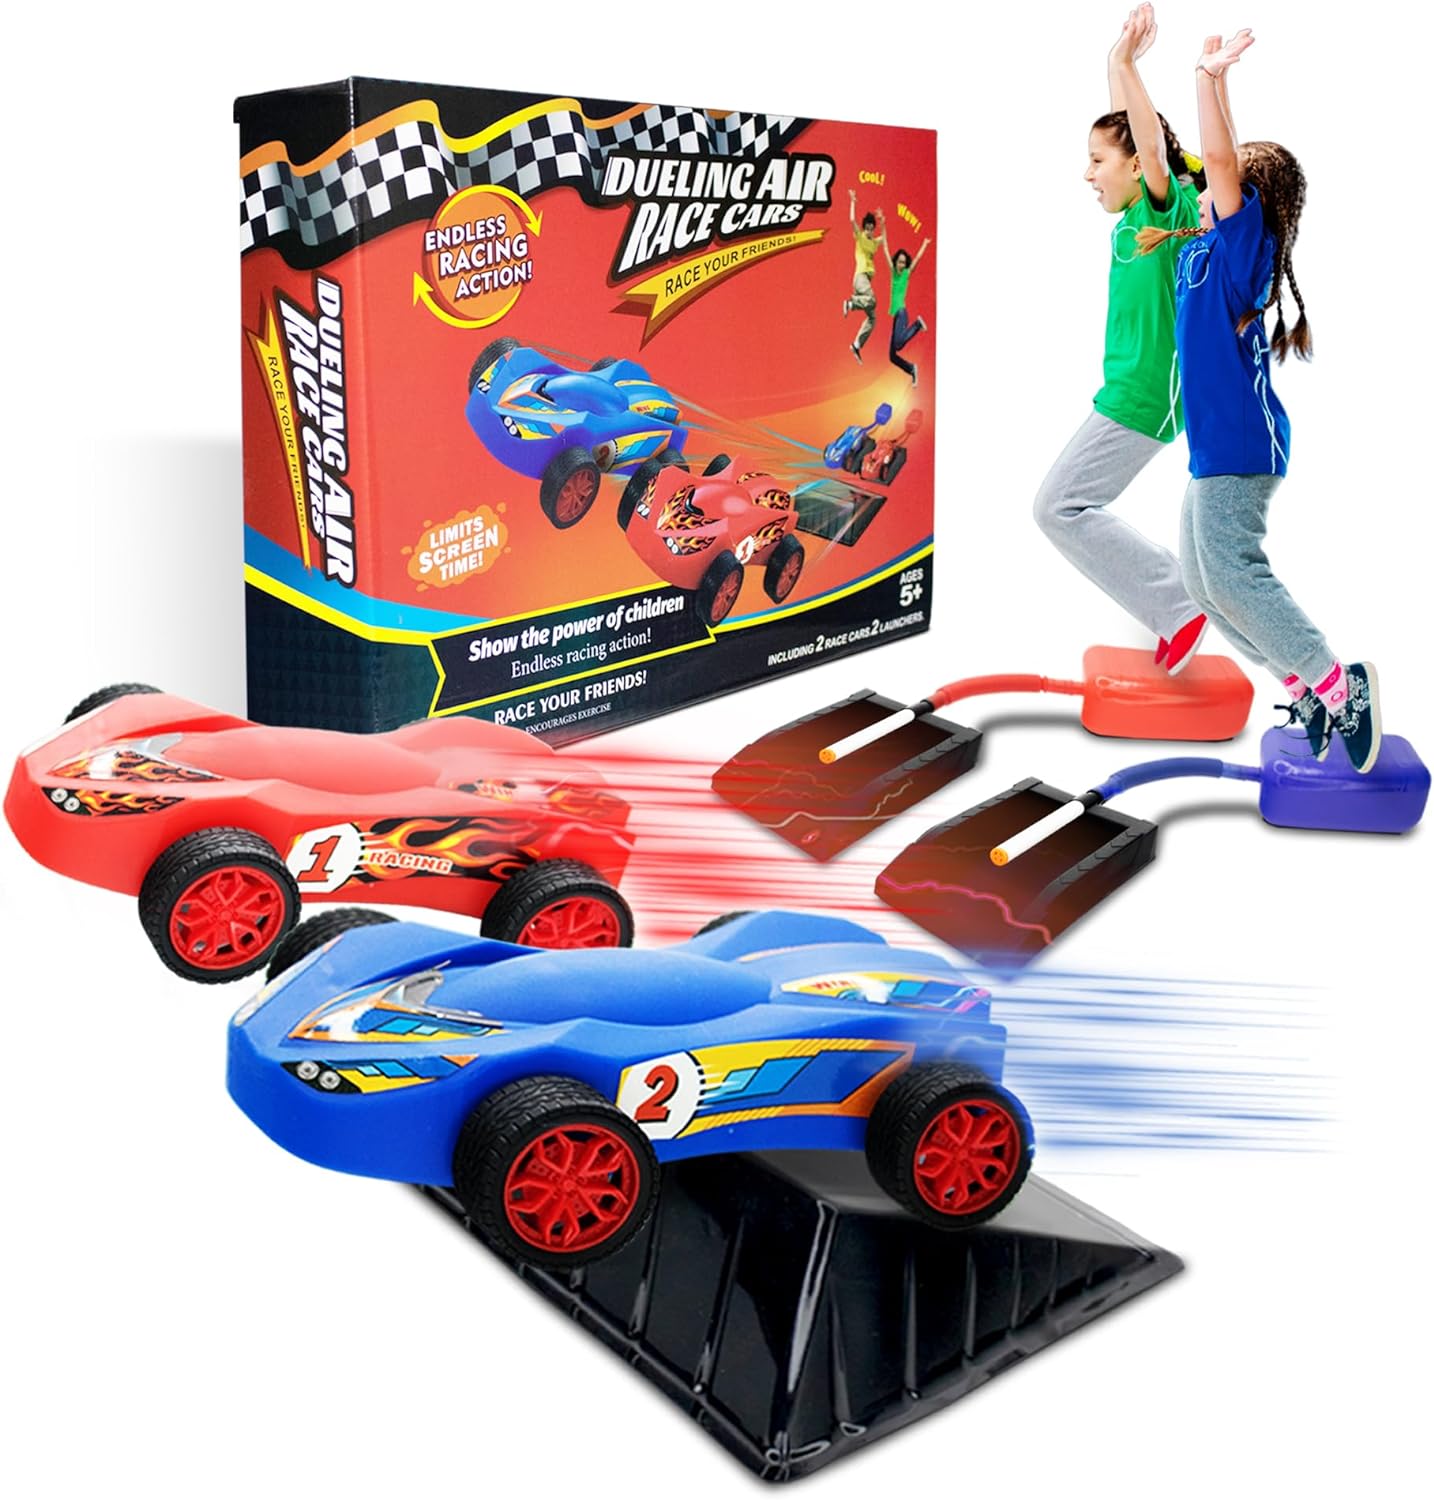 Stomp Rocket Dueling Stomp Racers, 2 Toy Car Launchers and 2 Air Powered